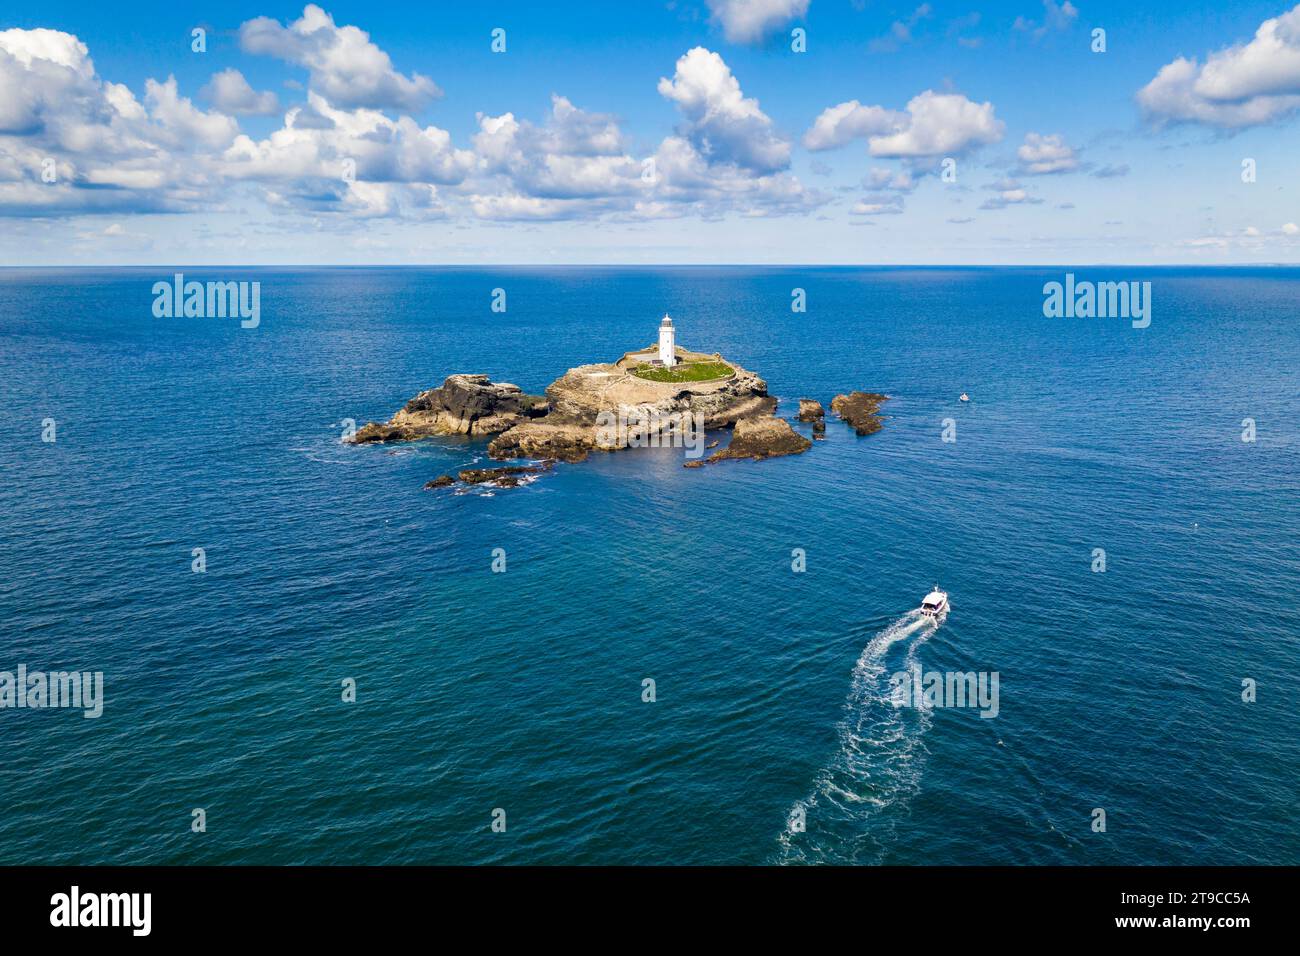 Aerial view of boat approaching Godrevy lighthouse and island, St Ives Bay, Cornwall, England. Spring (May) 2021. Stock Photo